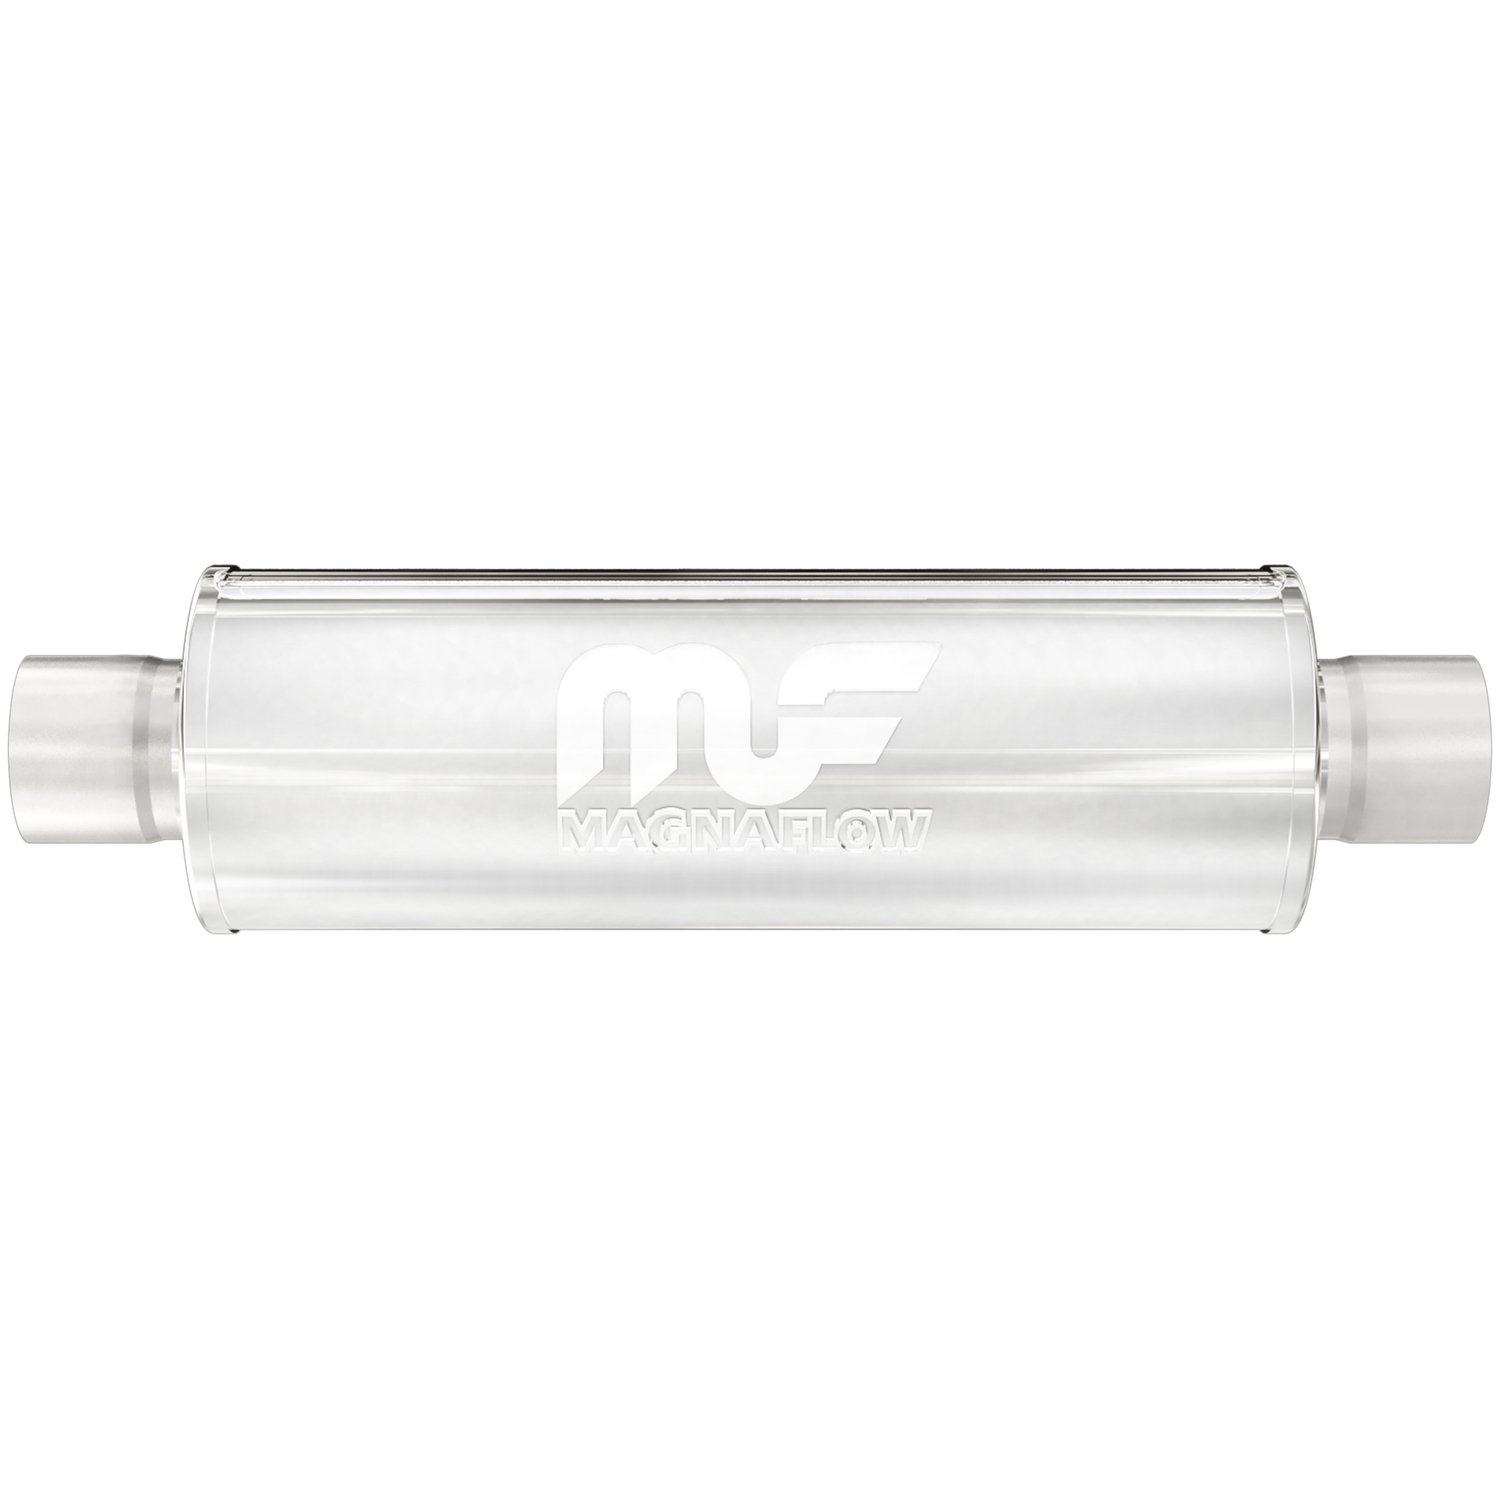 5" Round Muffler Center In/Center Out: 3" Body Length: 14" Overall Length: 20" Core Size: 3" Satin Finish